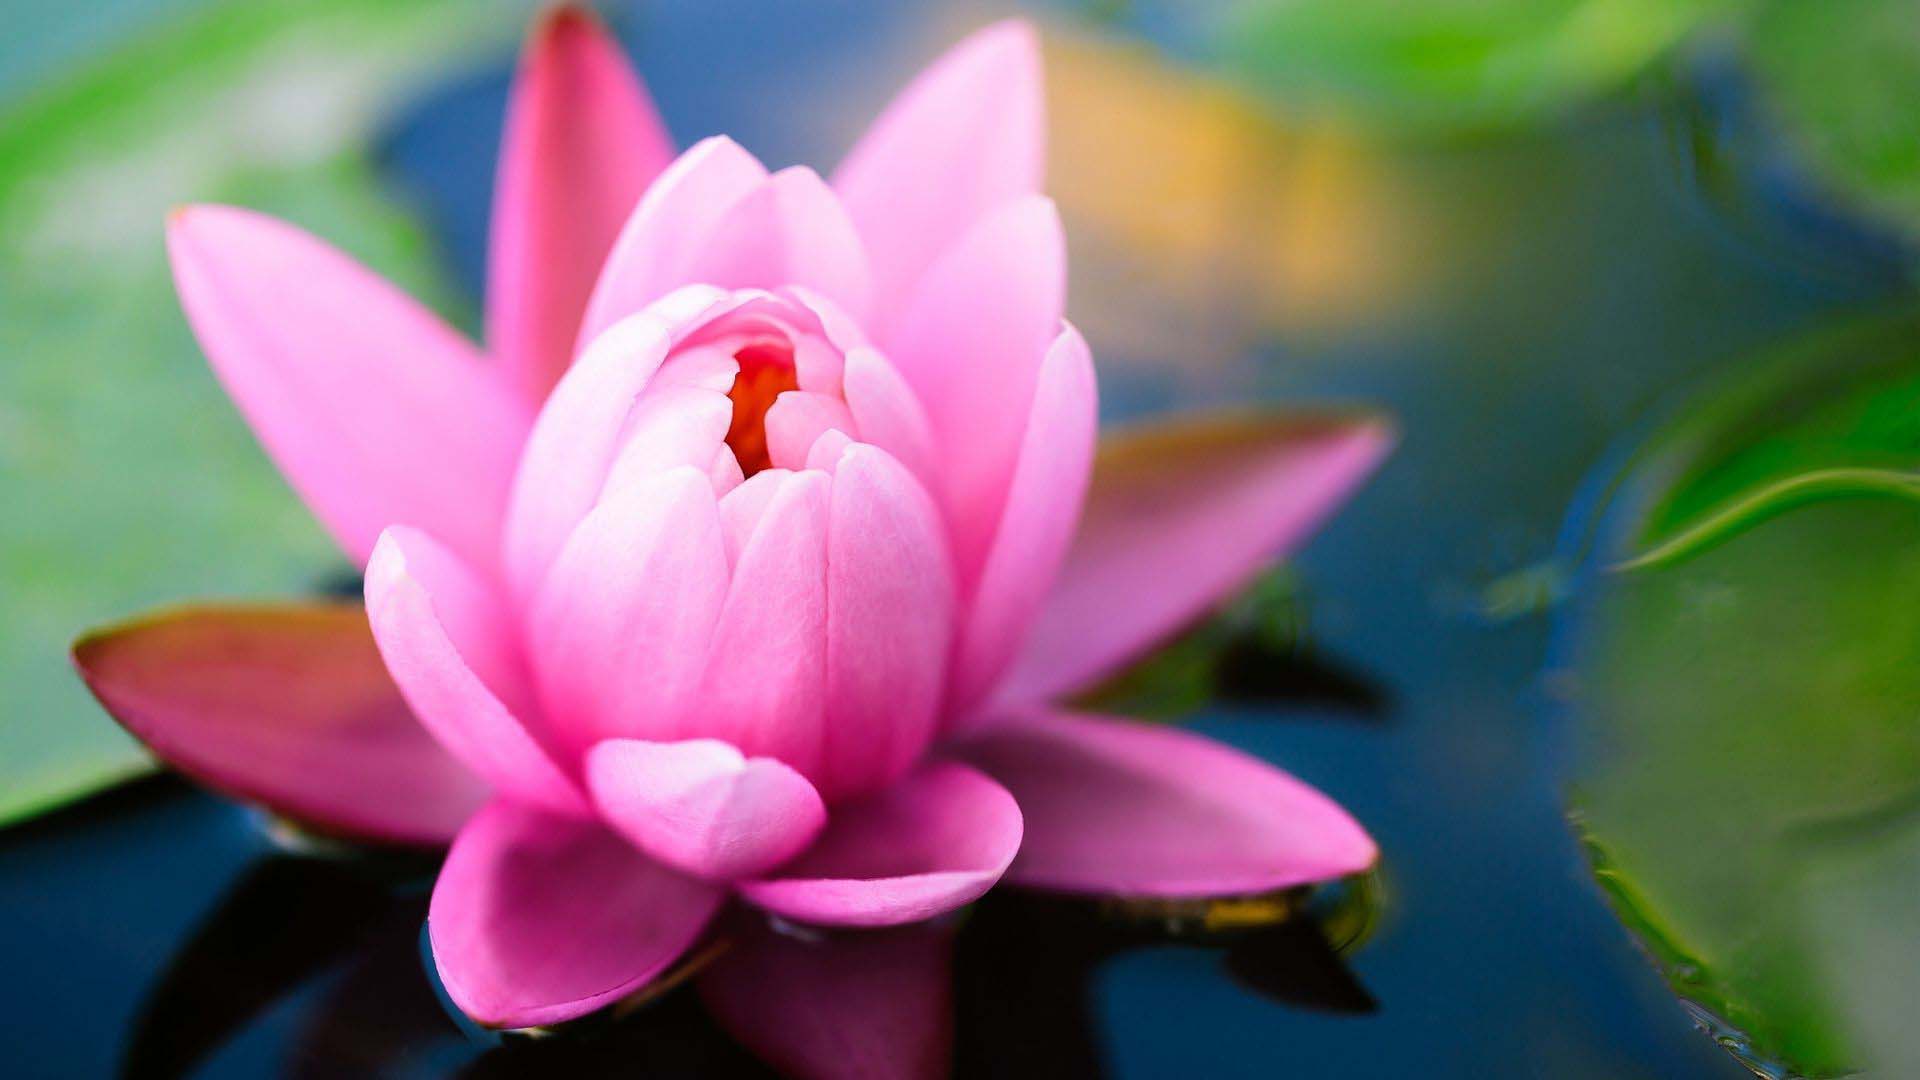 Flower Pink Water Lily Screensaver 1920x1080 Wallpaper - Cool PC ...